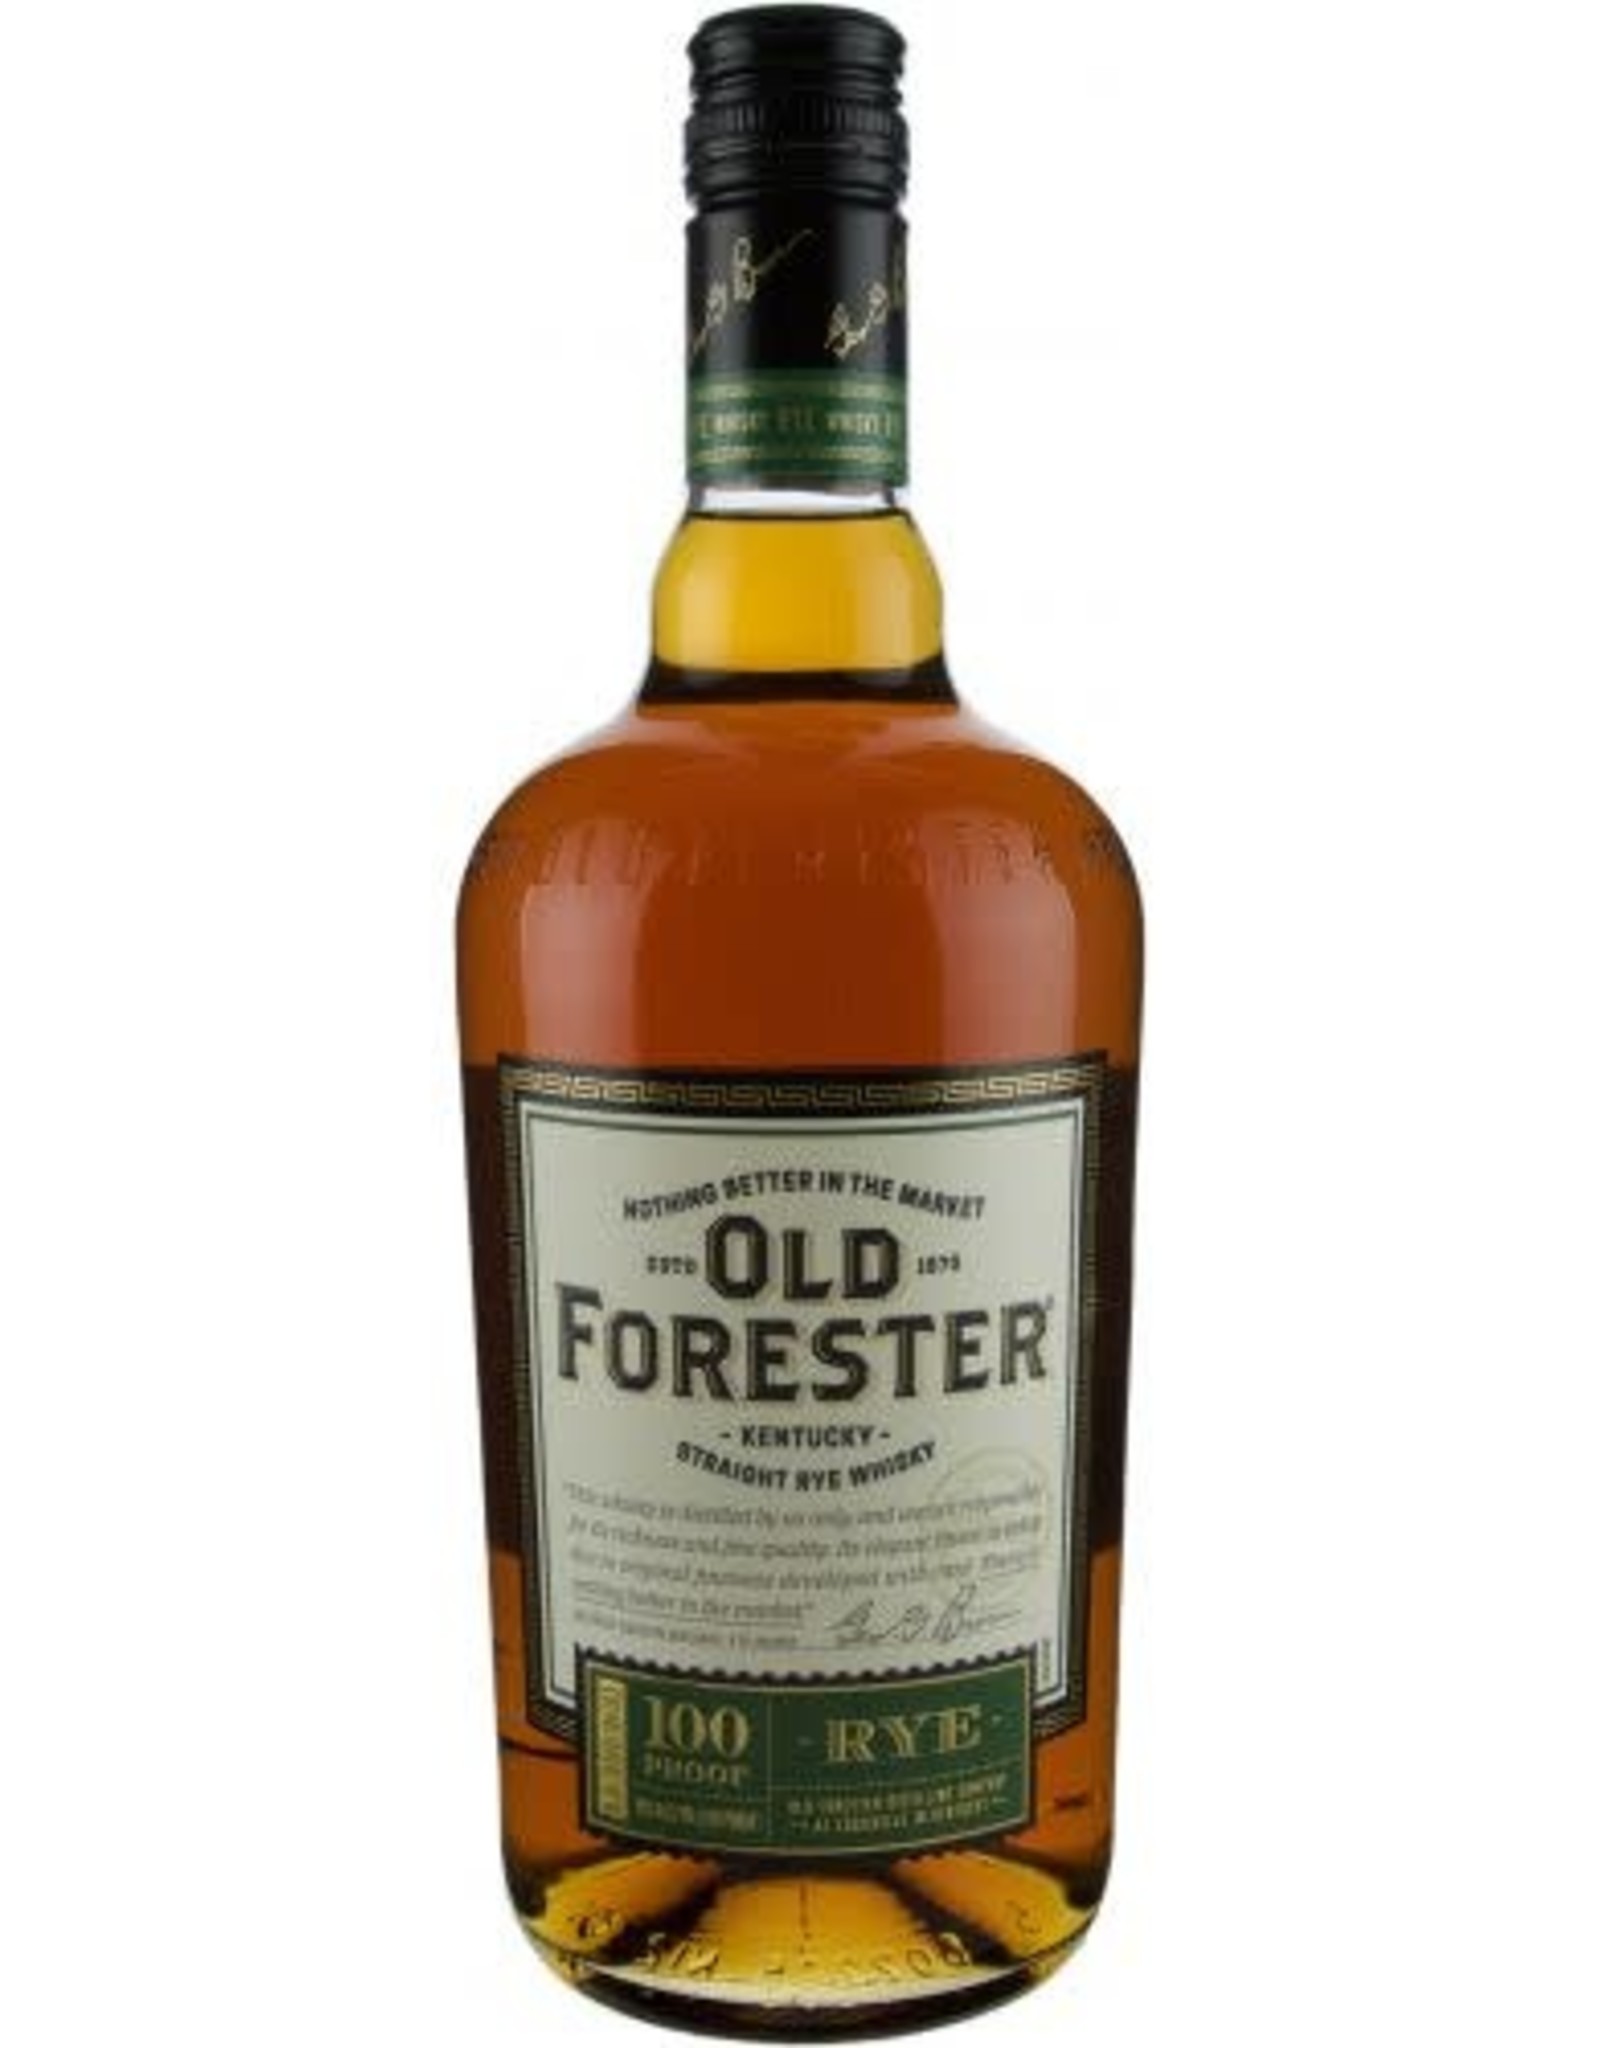 Old Forester Old Forester Rye 100 Proof Whiskey